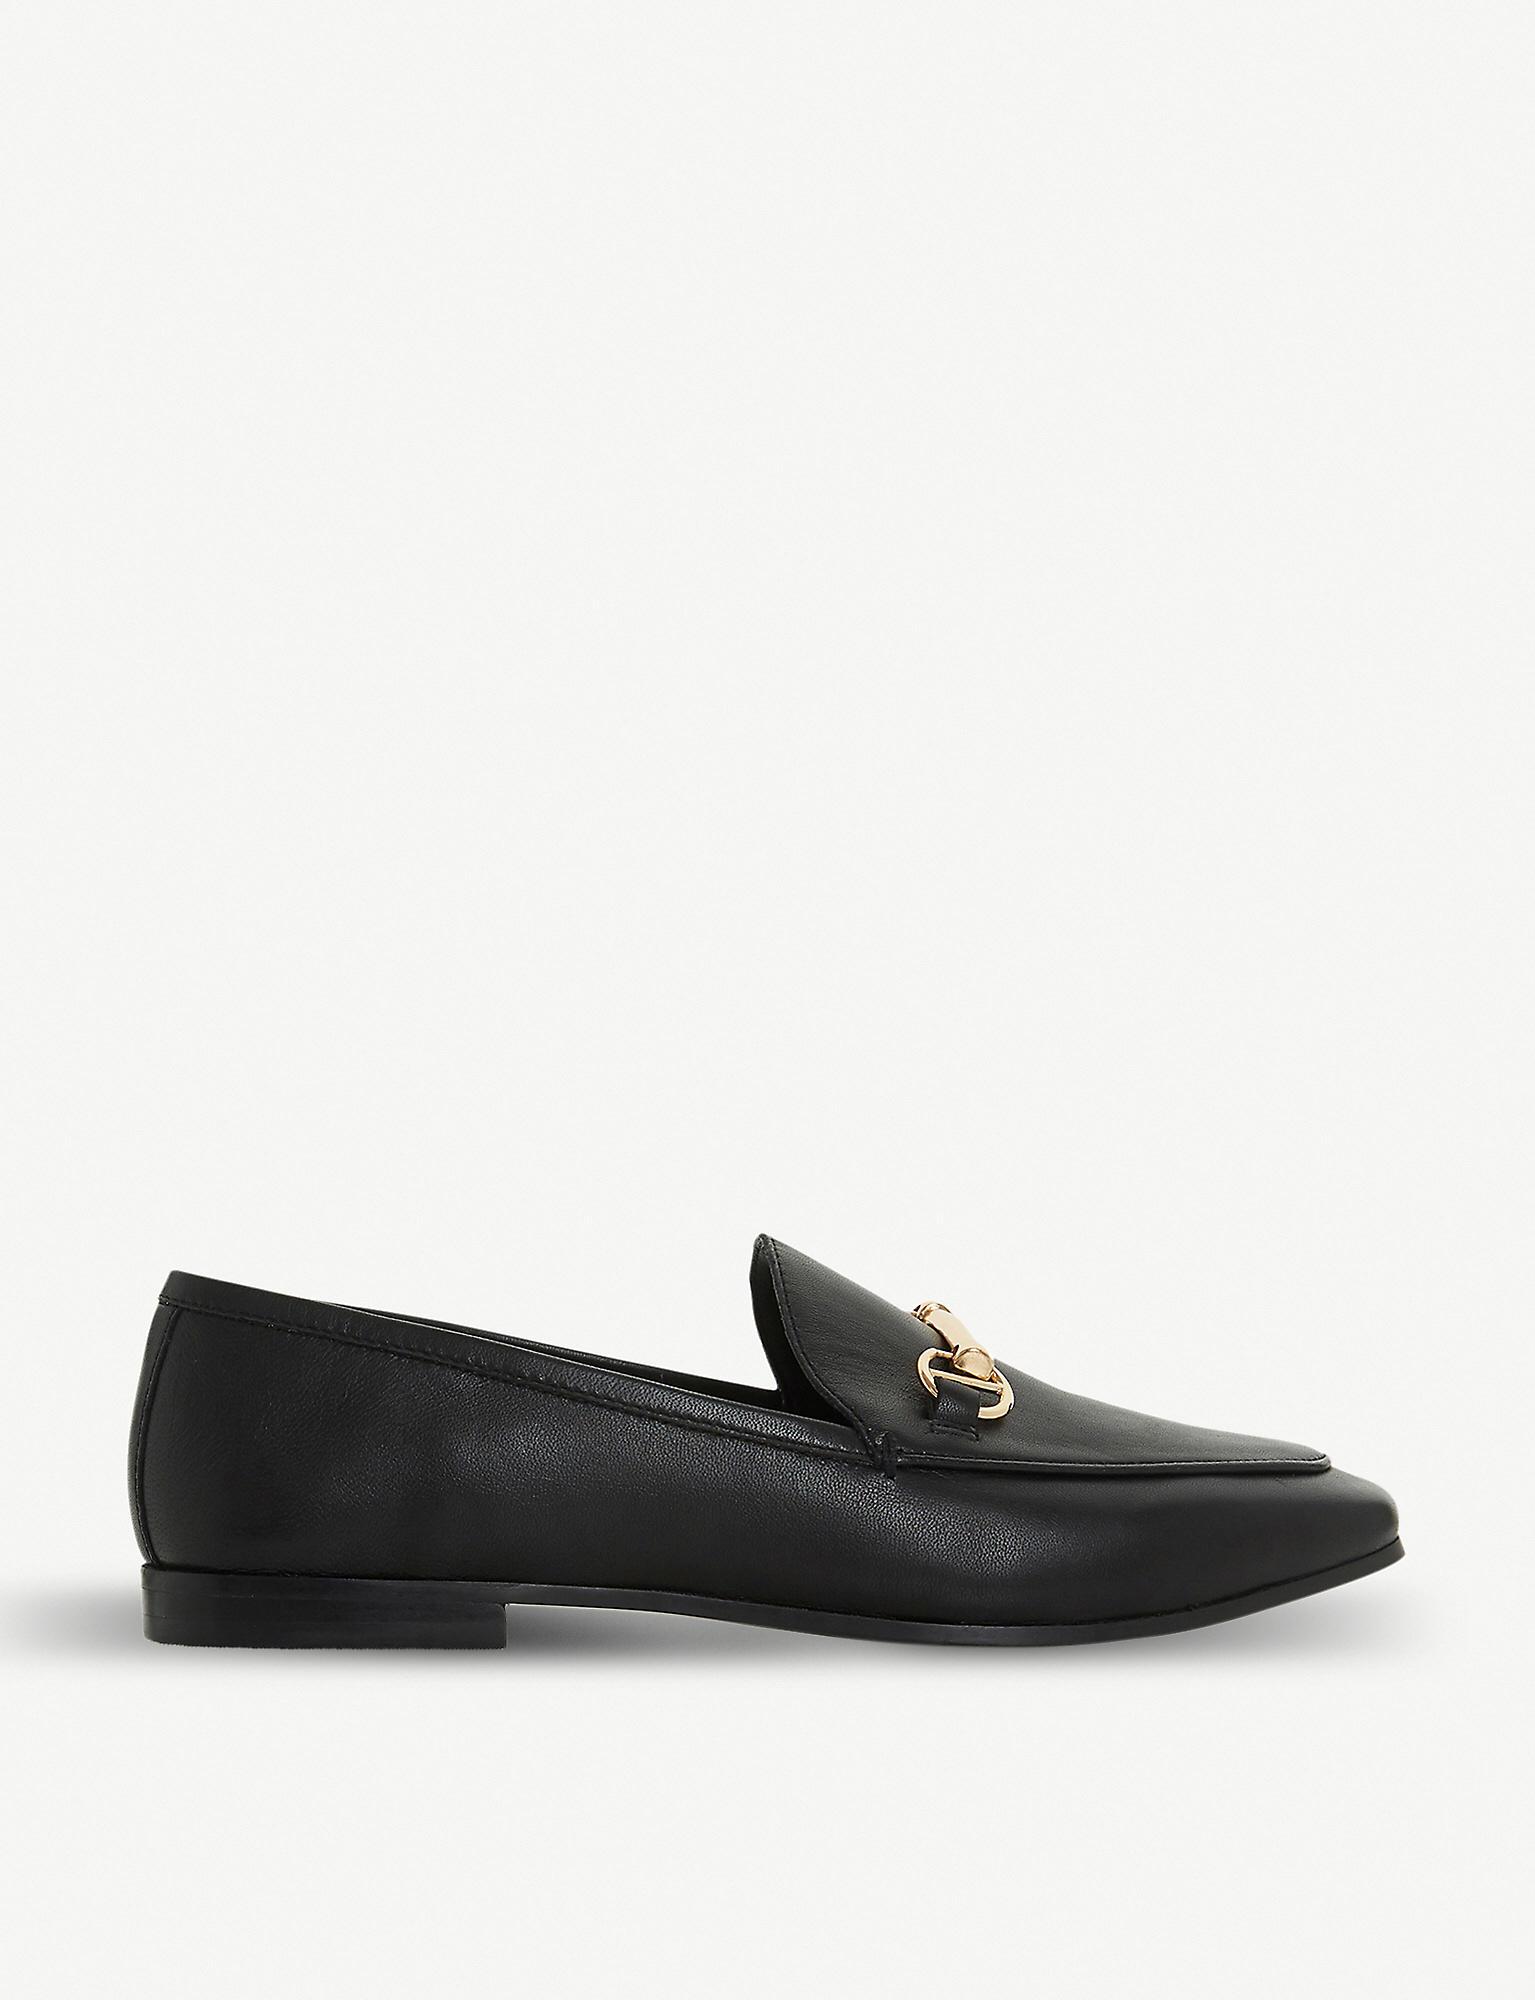 Dune Guiltt Snaffle Trim Leather Loafers in Black-Leather (Black) - Lyst